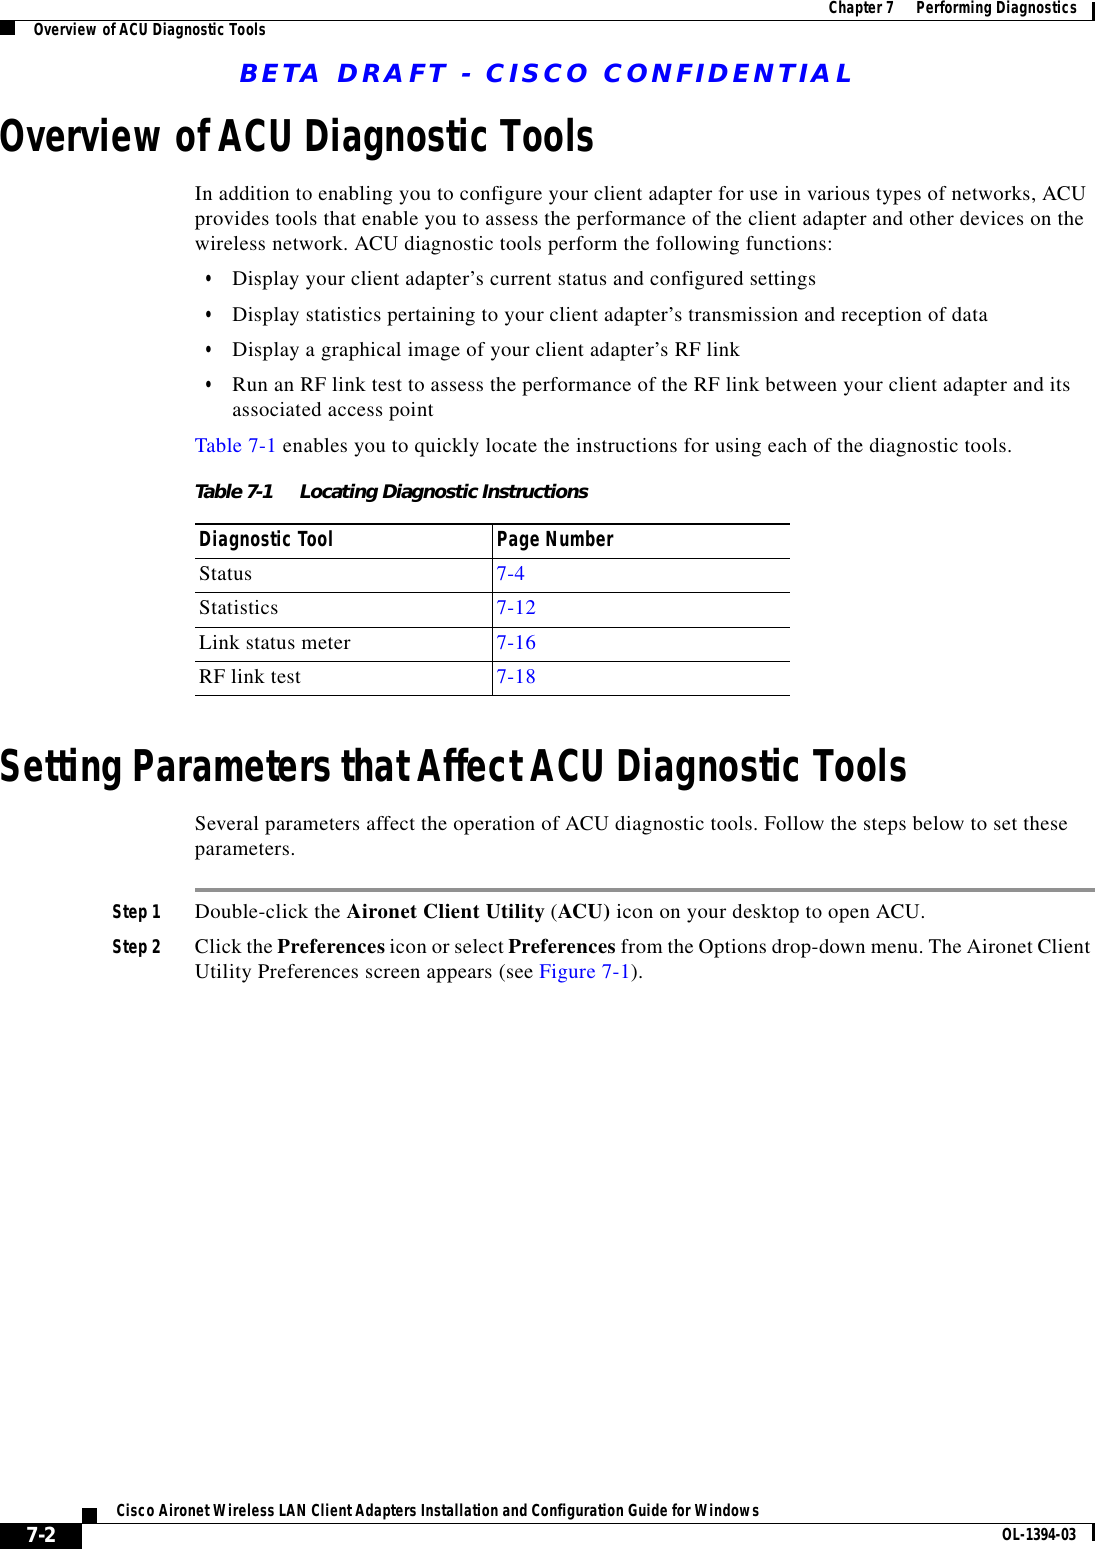 BETA DRAFT - CISCO CONFIDENTIAL7-2Cisco Aironet Wireless LAN Client Adapters Installation and Configuration Guide for Windows OL-1394-03Chapter 7      Performing DiagnosticsOverview of ACU Diagnostic ToolsOverview of ACU Diagnostic ToolsIn addition to enabling you to configure your client adapter for use in various types of networks, ACU provides tools that enable you to assess the performance of the client adapter and other devices on the wireless network. ACU diagnostic tools perform the following functions:•Display your client adapter’s current status and configured settings•Display statistics pertaining to your client adapter’s transmission and reception of data•Display a graphical image of your client adapter’s RF link•Run an RF link test to assess the performance of the RF link between your client adapter and its associated access pointTable 7-1 enables you to quickly locate the instructions for using each of the diagnostic tools.Setting Parameters that Affect ACU Diagnostic ToolsSeveral parameters affect the operation of ACU diagnostic tools. Follow the steps below to set these parameters.Step 1 Double-click the Aironet Client Utility (ACU) icon on your desktop to open ACU.Step 2 Click the Preferences icon or select Preferences from the Options drop-down menu. The Aironet Client Utility Preferences screen appears (see Figure 7-1).Table 7-1 Locating Diagnostic InstructionsDiagnostic Tool Page NumberStatus 7-4Statistics 7-12Link status meter 7-16RF link test 7-18